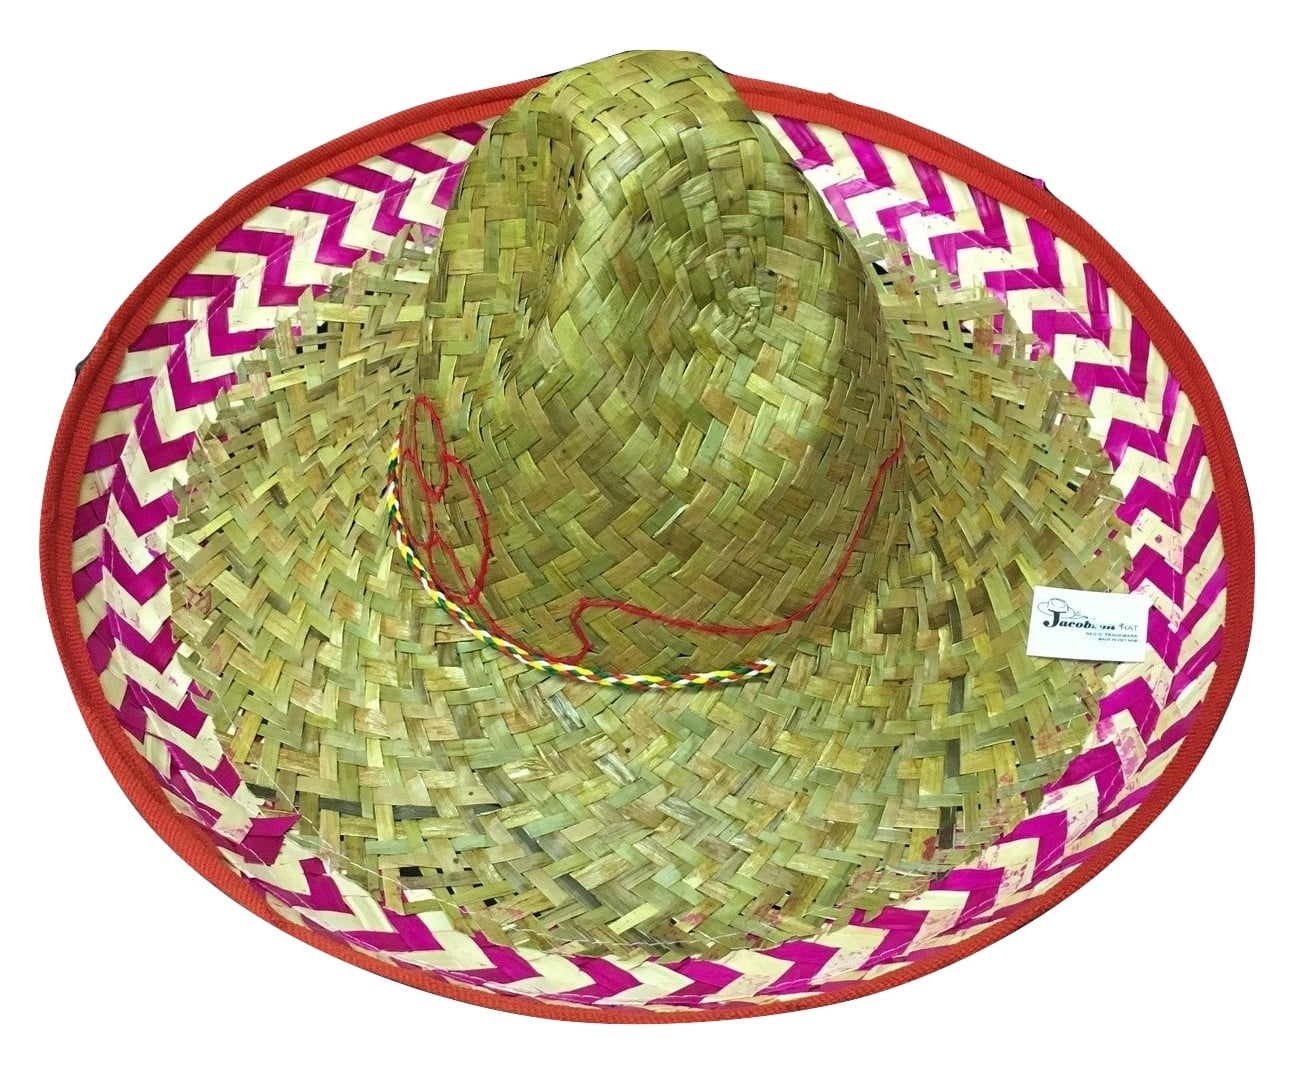 24 Pack Let's Fiesta Sombrero Party Hats for Cinco de Mayo Party Favors,  Mexican Themed Party Decorations (4 Colors) 